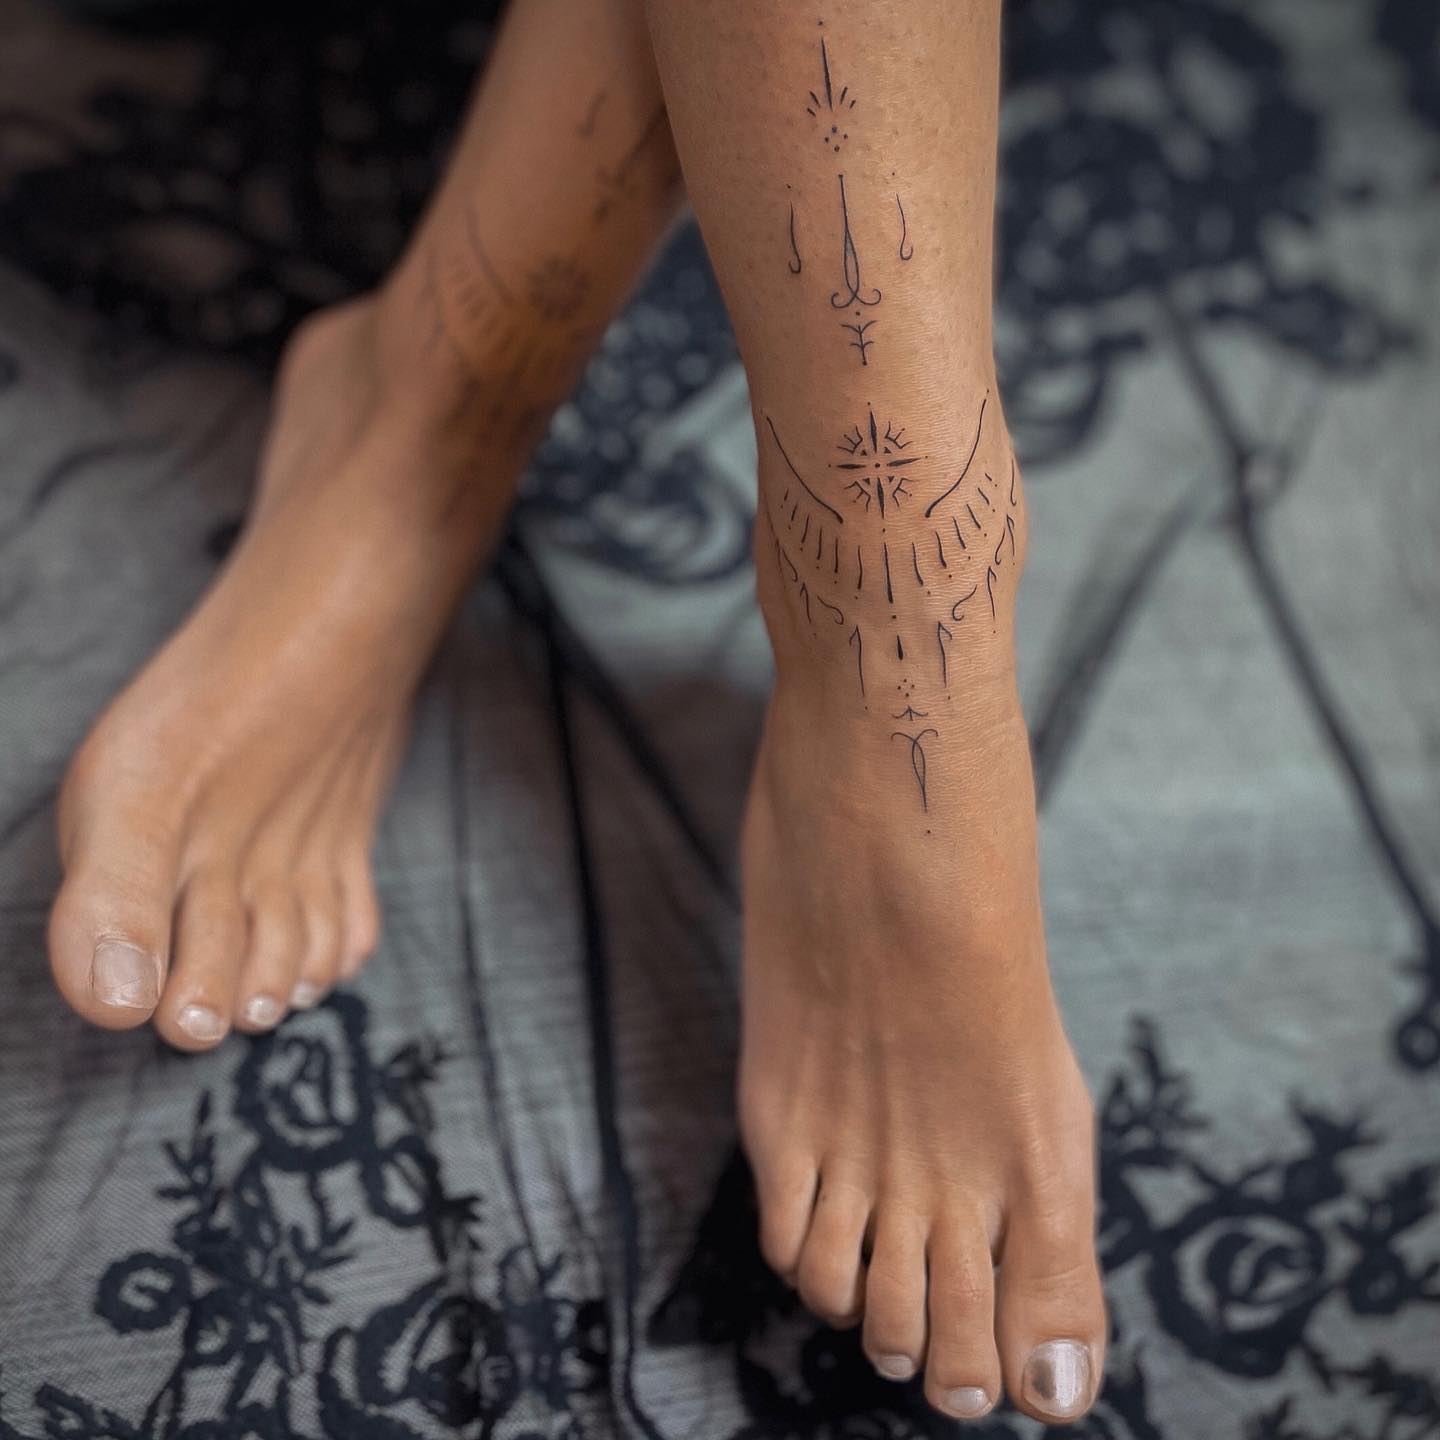 This simple ankle tattoo has that mandala vibe to it. Do you fancy it? It is a delicate and simple design, a must-try by women worldwide who like spiritual ink.